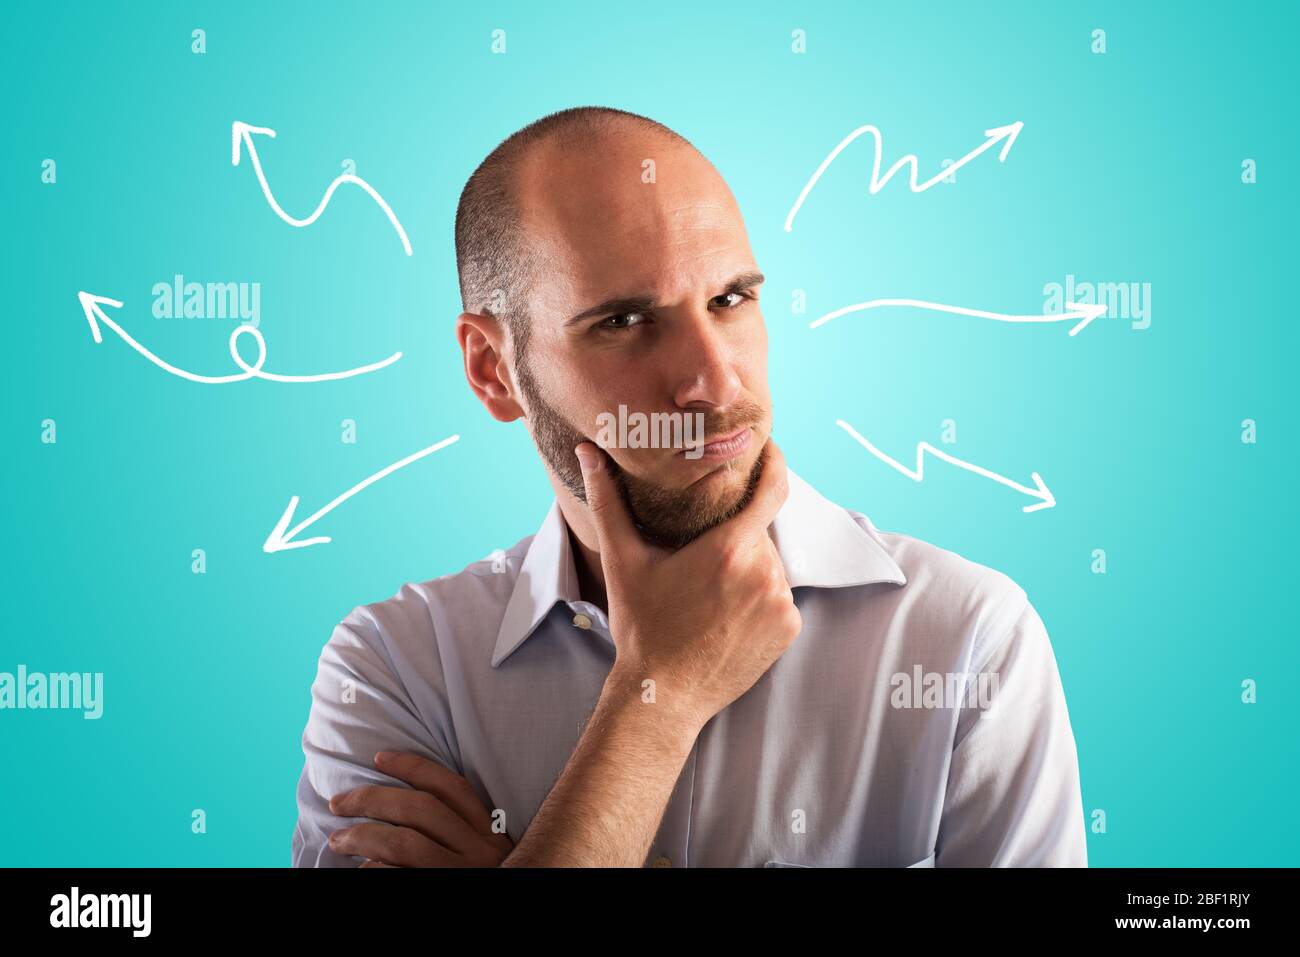 Confused and pensive man thinks about the best way forward Stock Photo